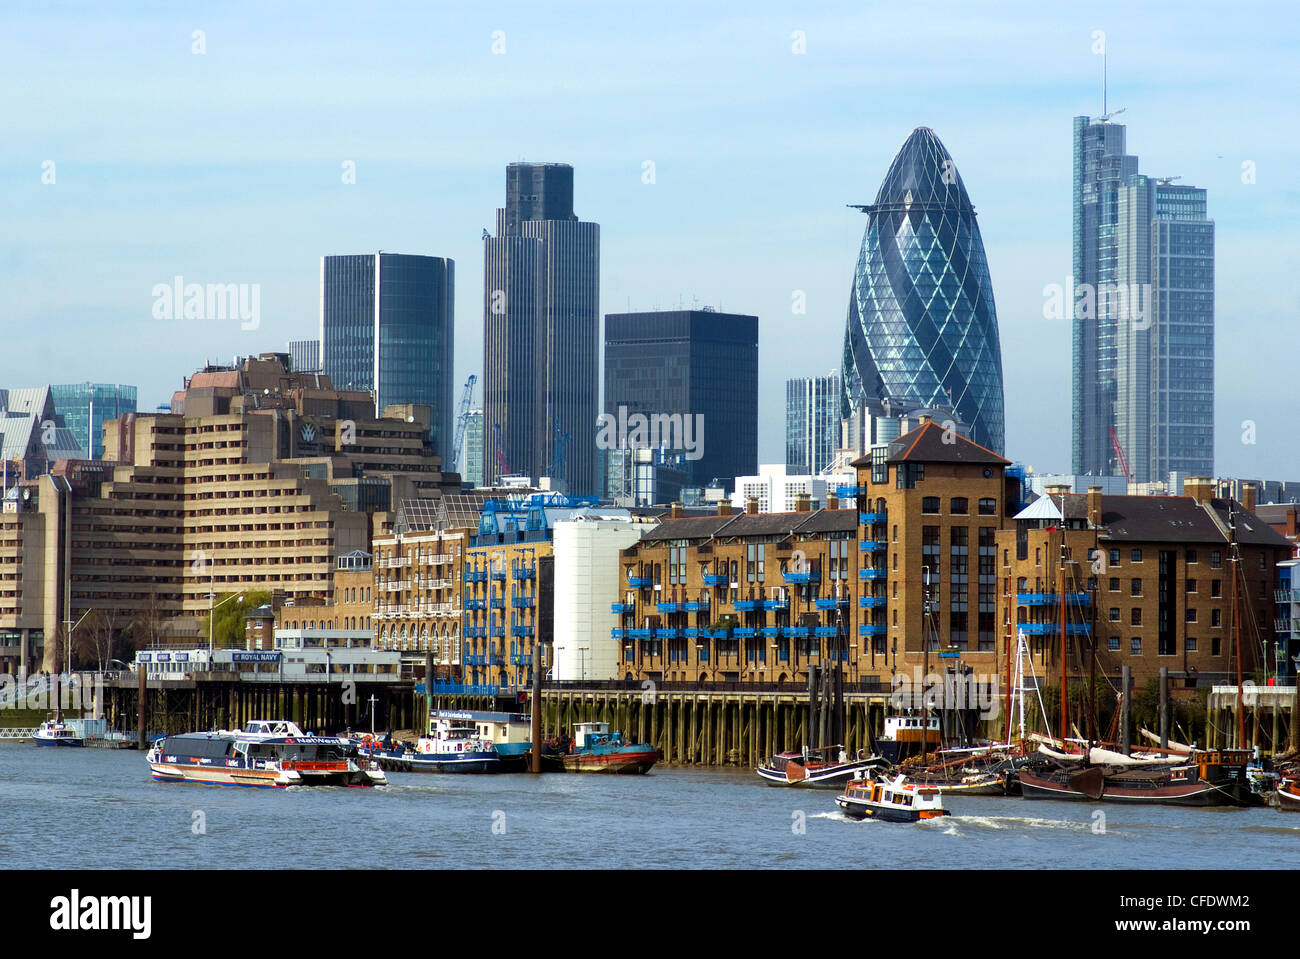 A view of the City of London looking northwest across the Thames, London, England, UK Stock Photo